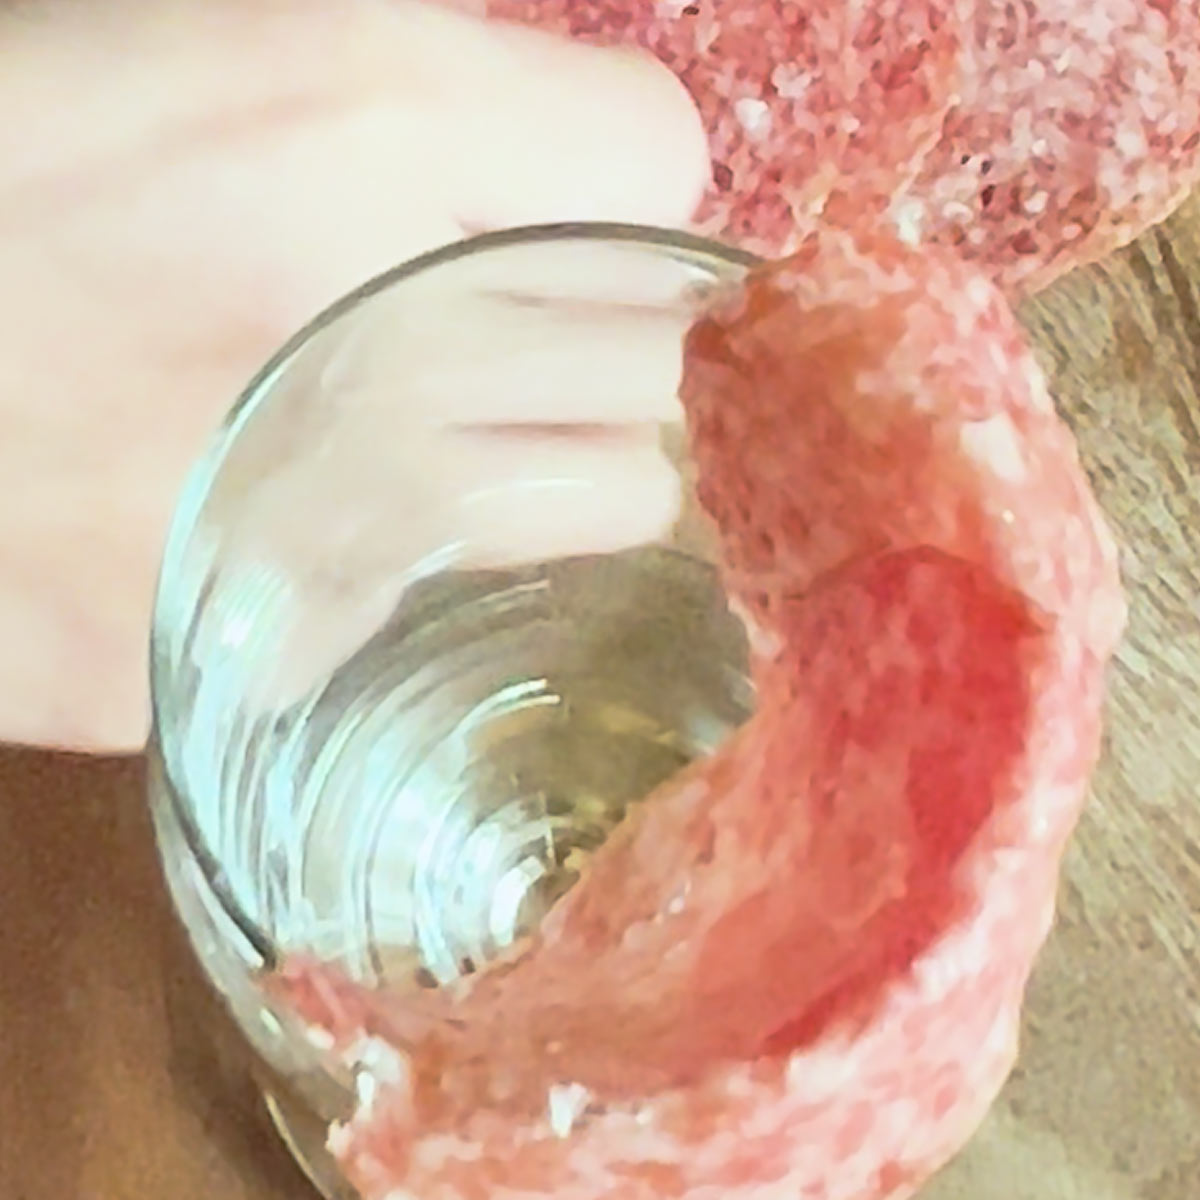 second slice of salami on the glass